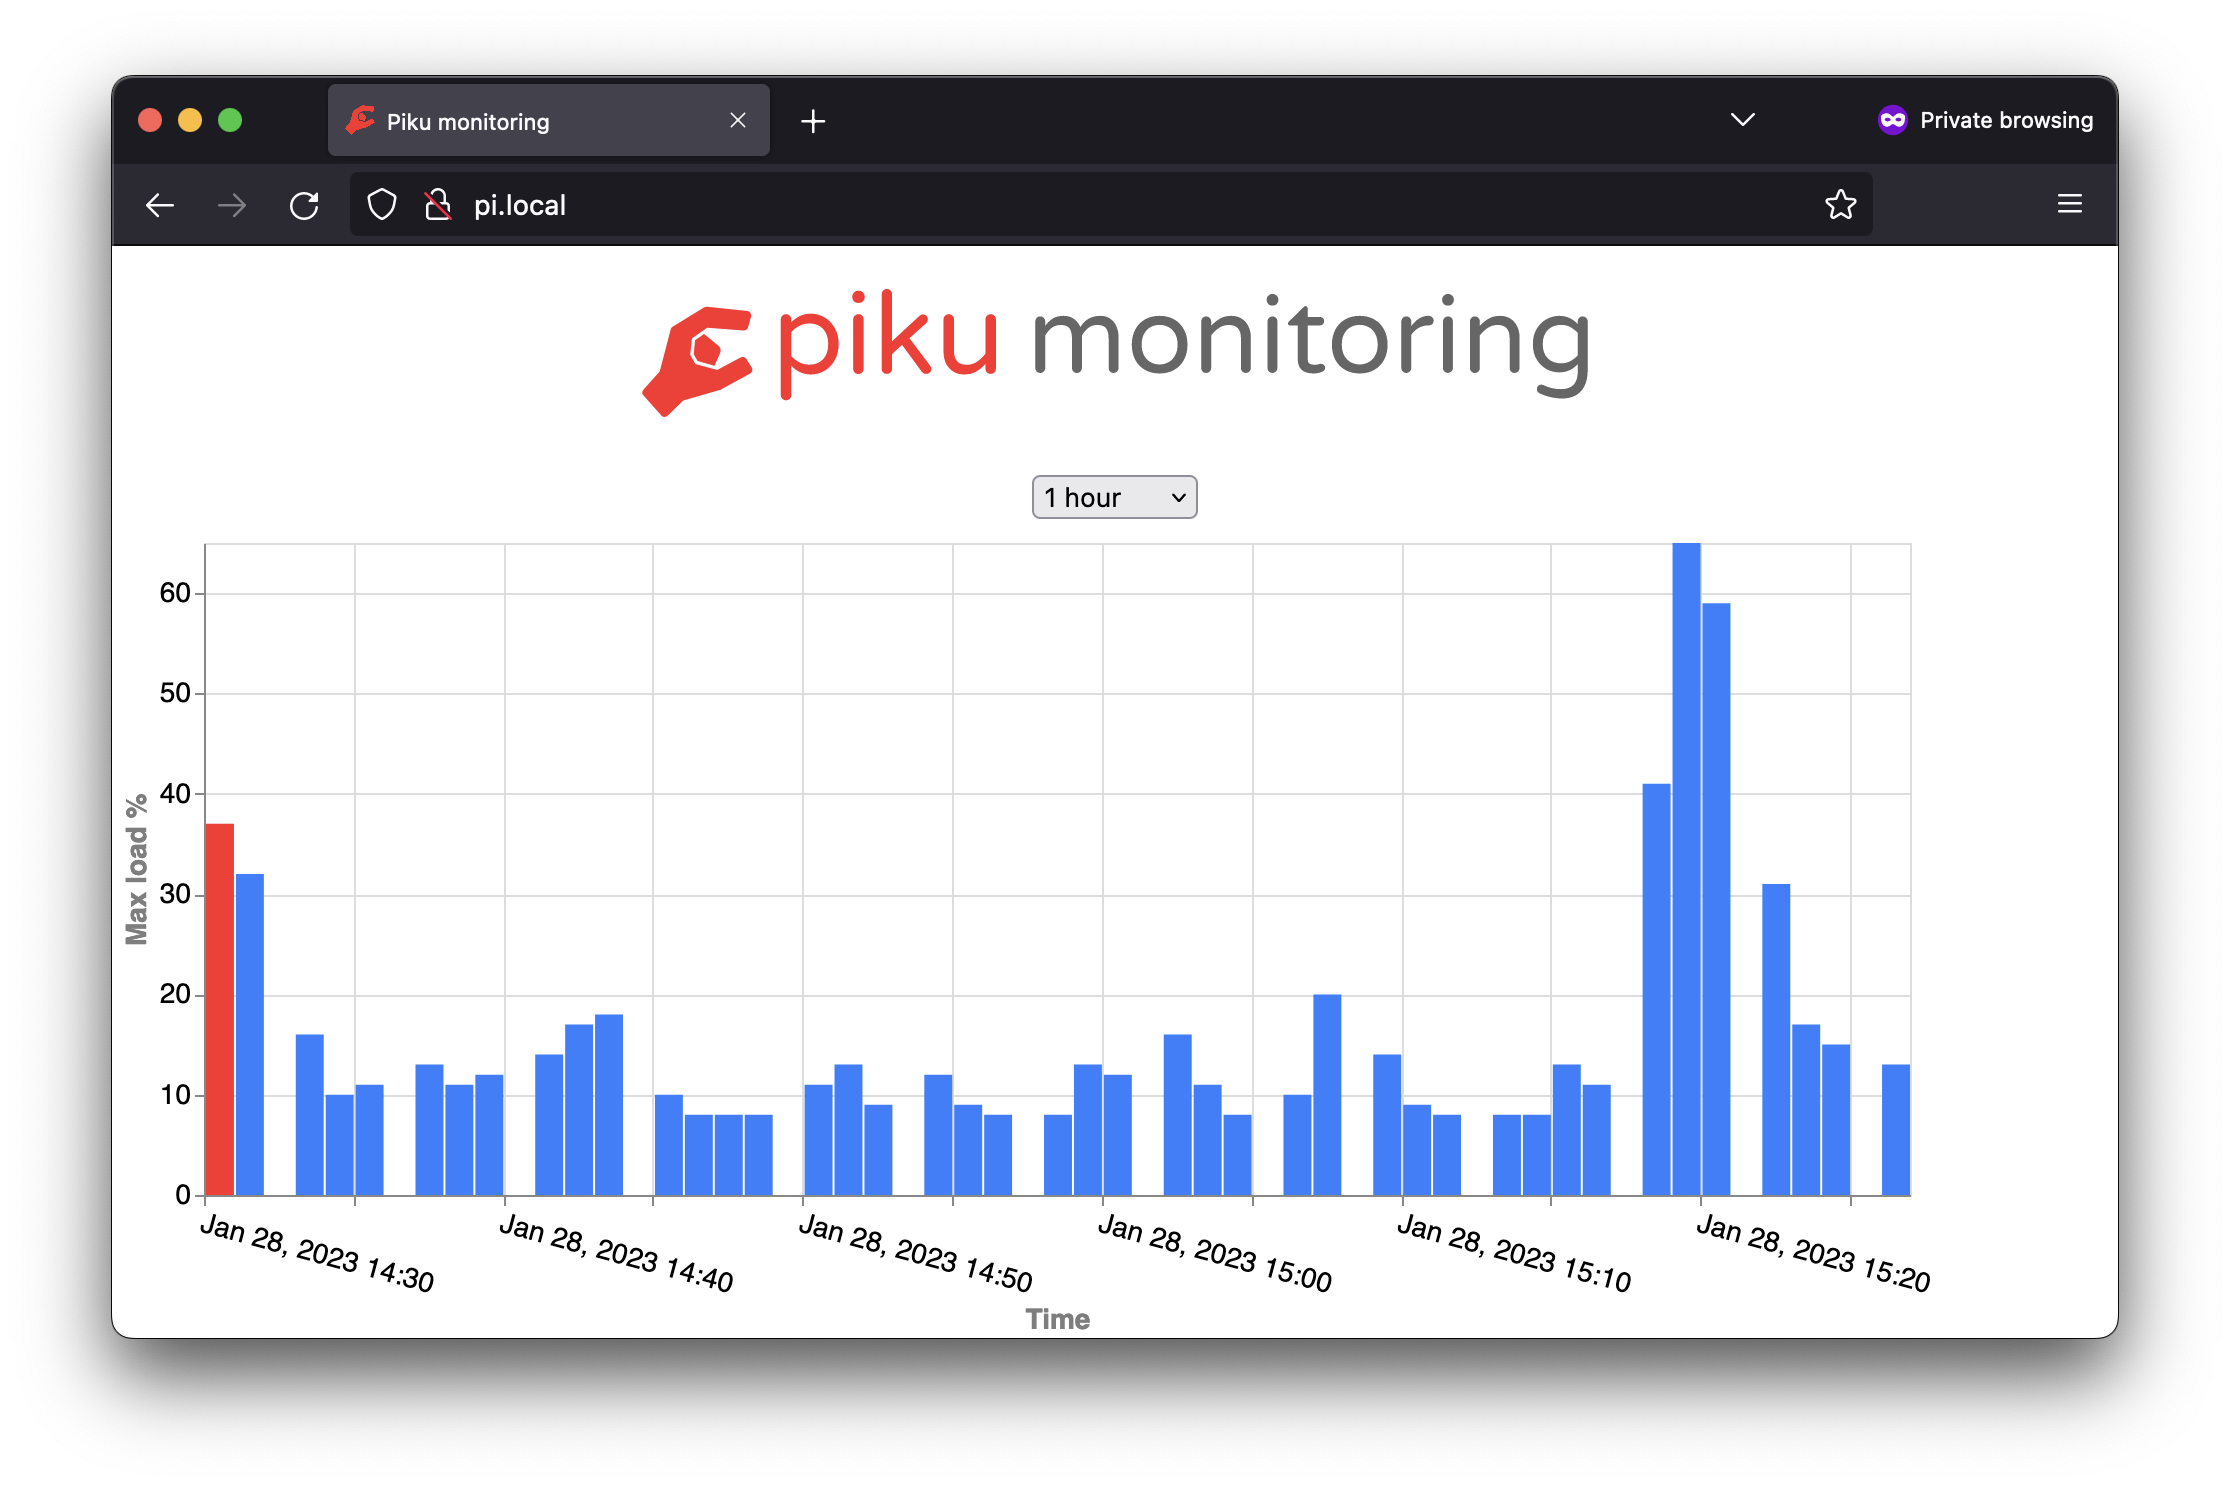 Screenshot of internet browser showing the Piku monitoring app with a graph showing max load percent over time.